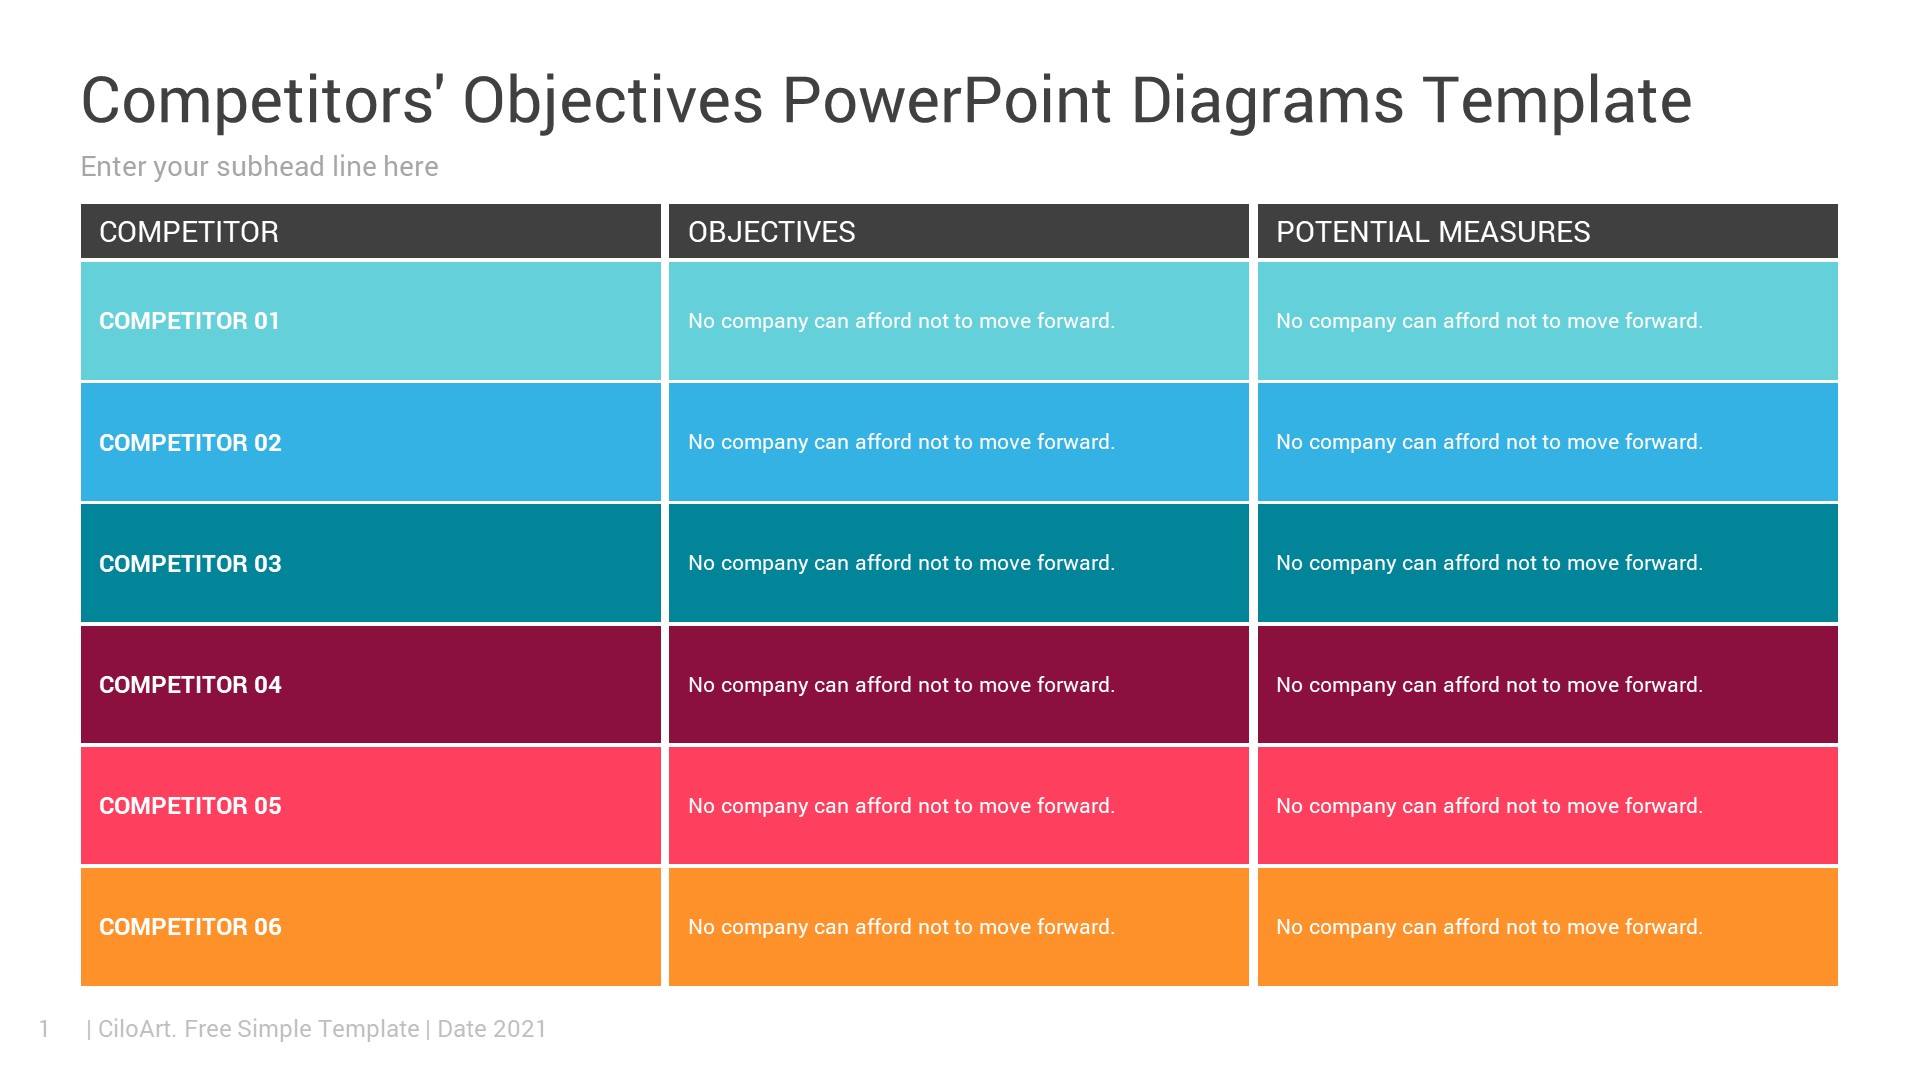 Competitors' Objectives PowerPoint Diagrams Template